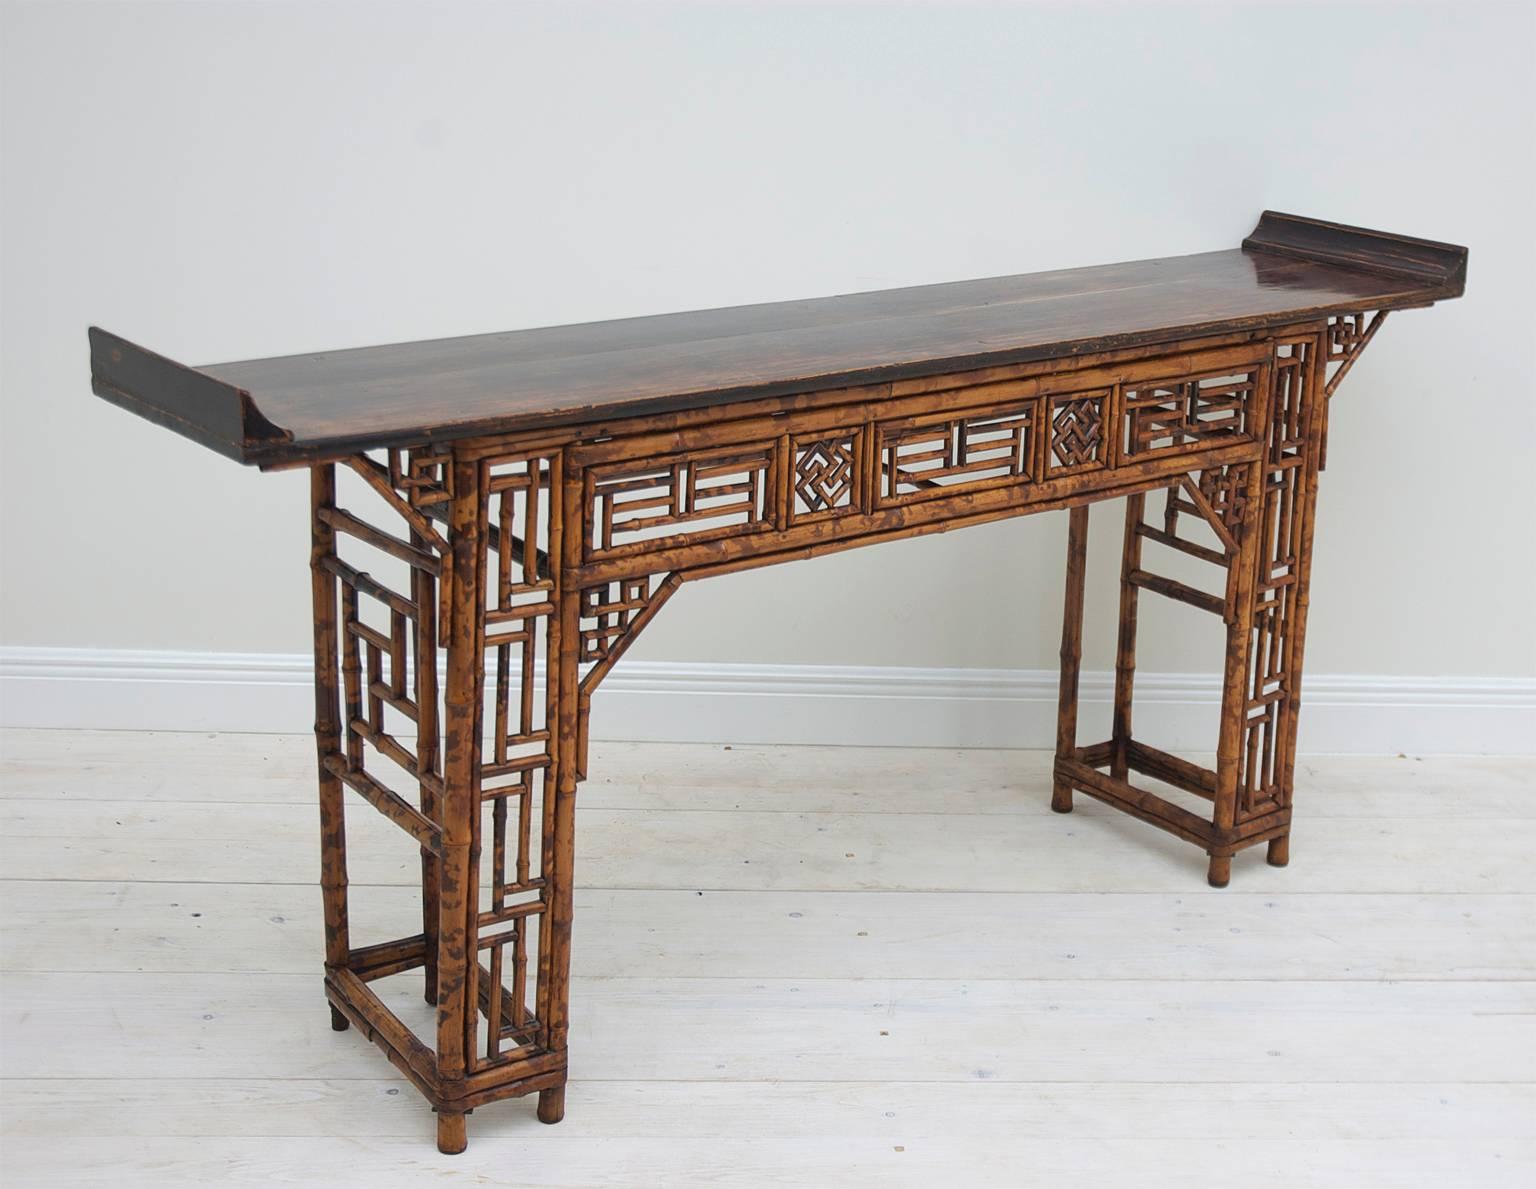 A very beautiful bamboo altar table with everted ends on elm top with on recessed double-pedestal base with open lattice work. Qing dynasty, China, circa early-mid 1800s.

The narrow depth makes this a wonderful entrance table, sideboard or sofa